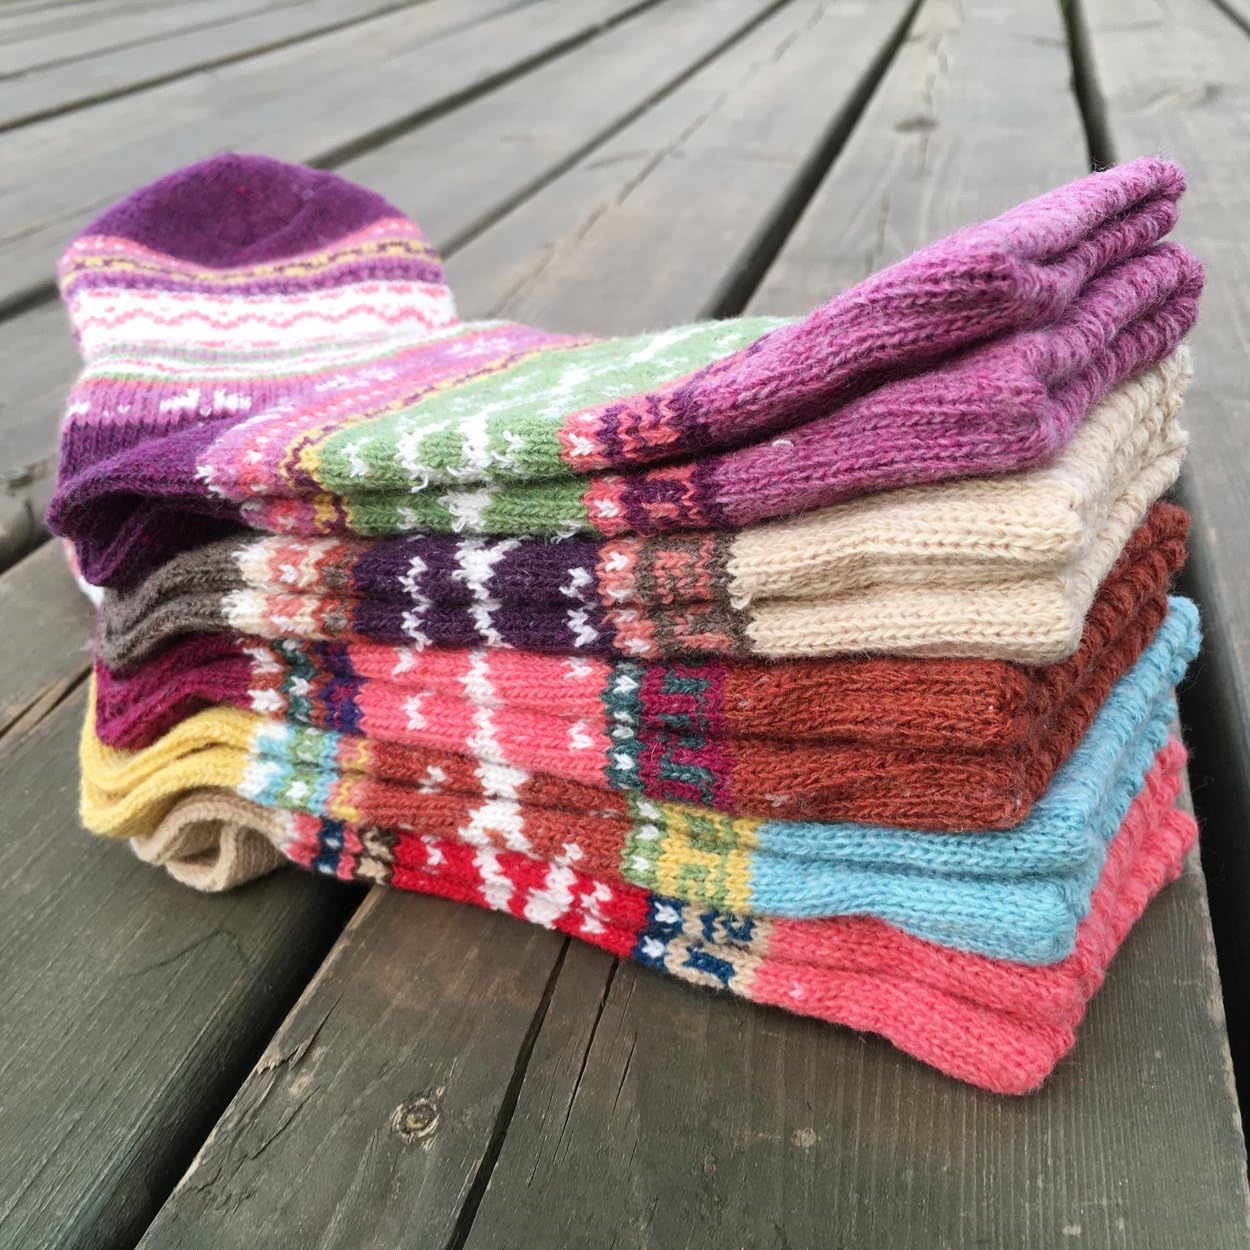 YZKKE 5Pack Womens Vintage Winter Soft Warm Thick Cold Knit Wool Crew Socks, Multicolor, free size